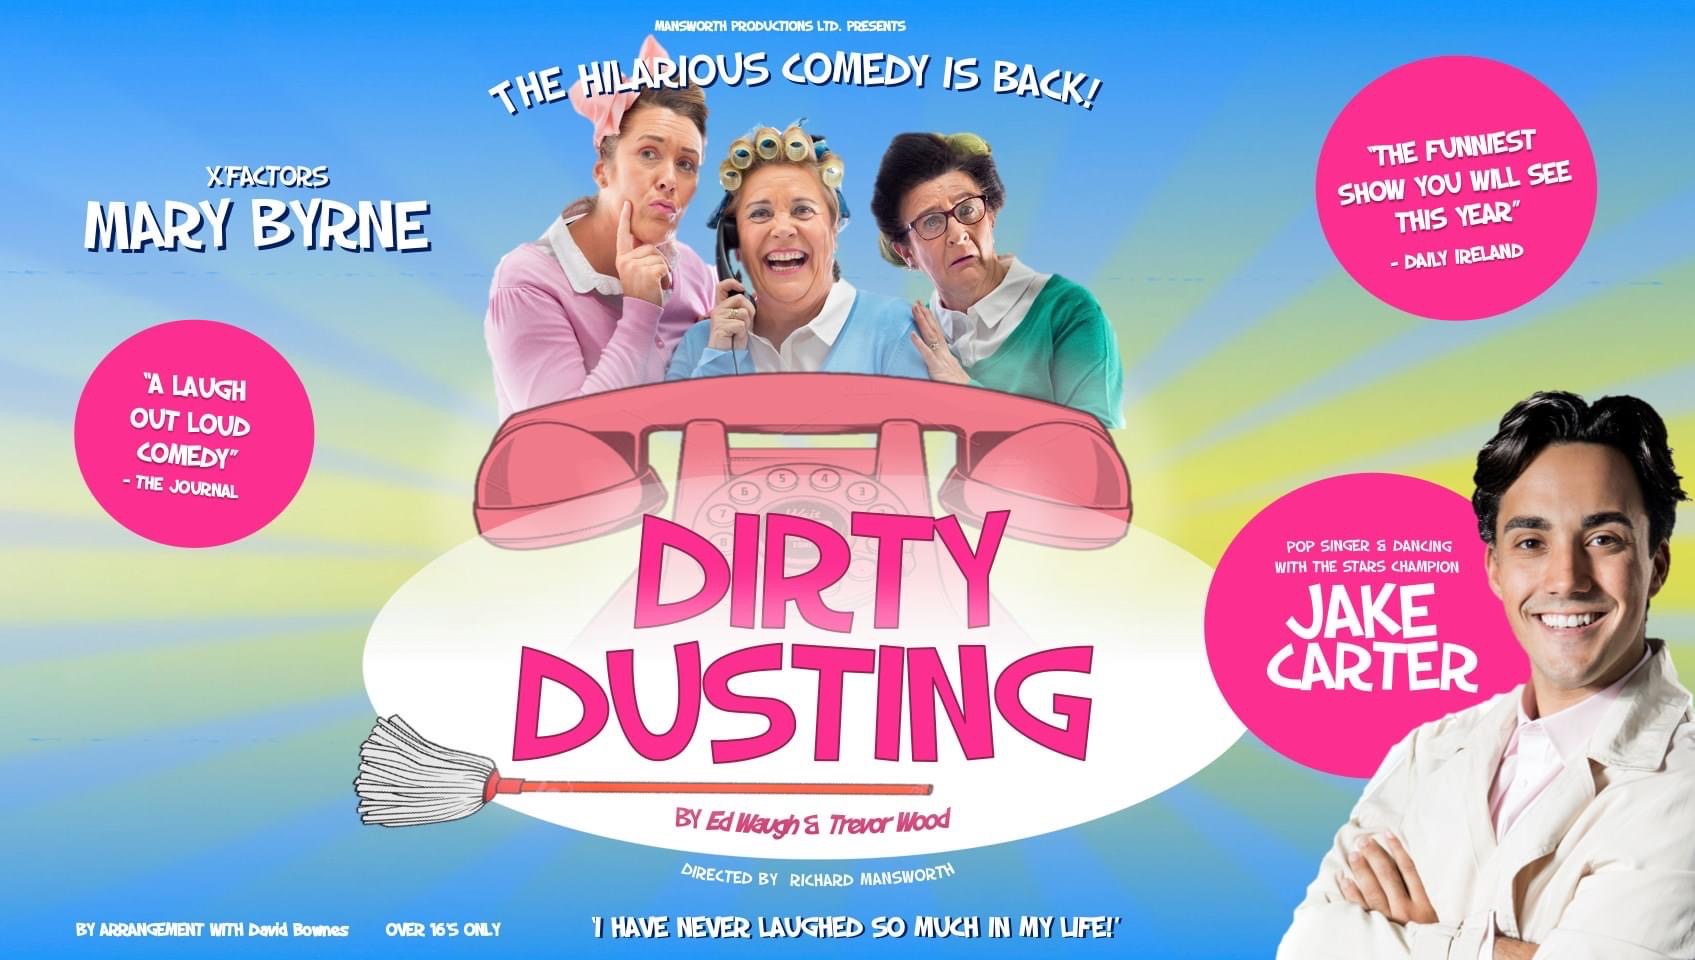 Dirty Dusting - Round up your friends for a hilarious night out starring X Factor’s Mary Byrne alongside Pop Singer and Dancing With The Stars Champion Jake Carter!